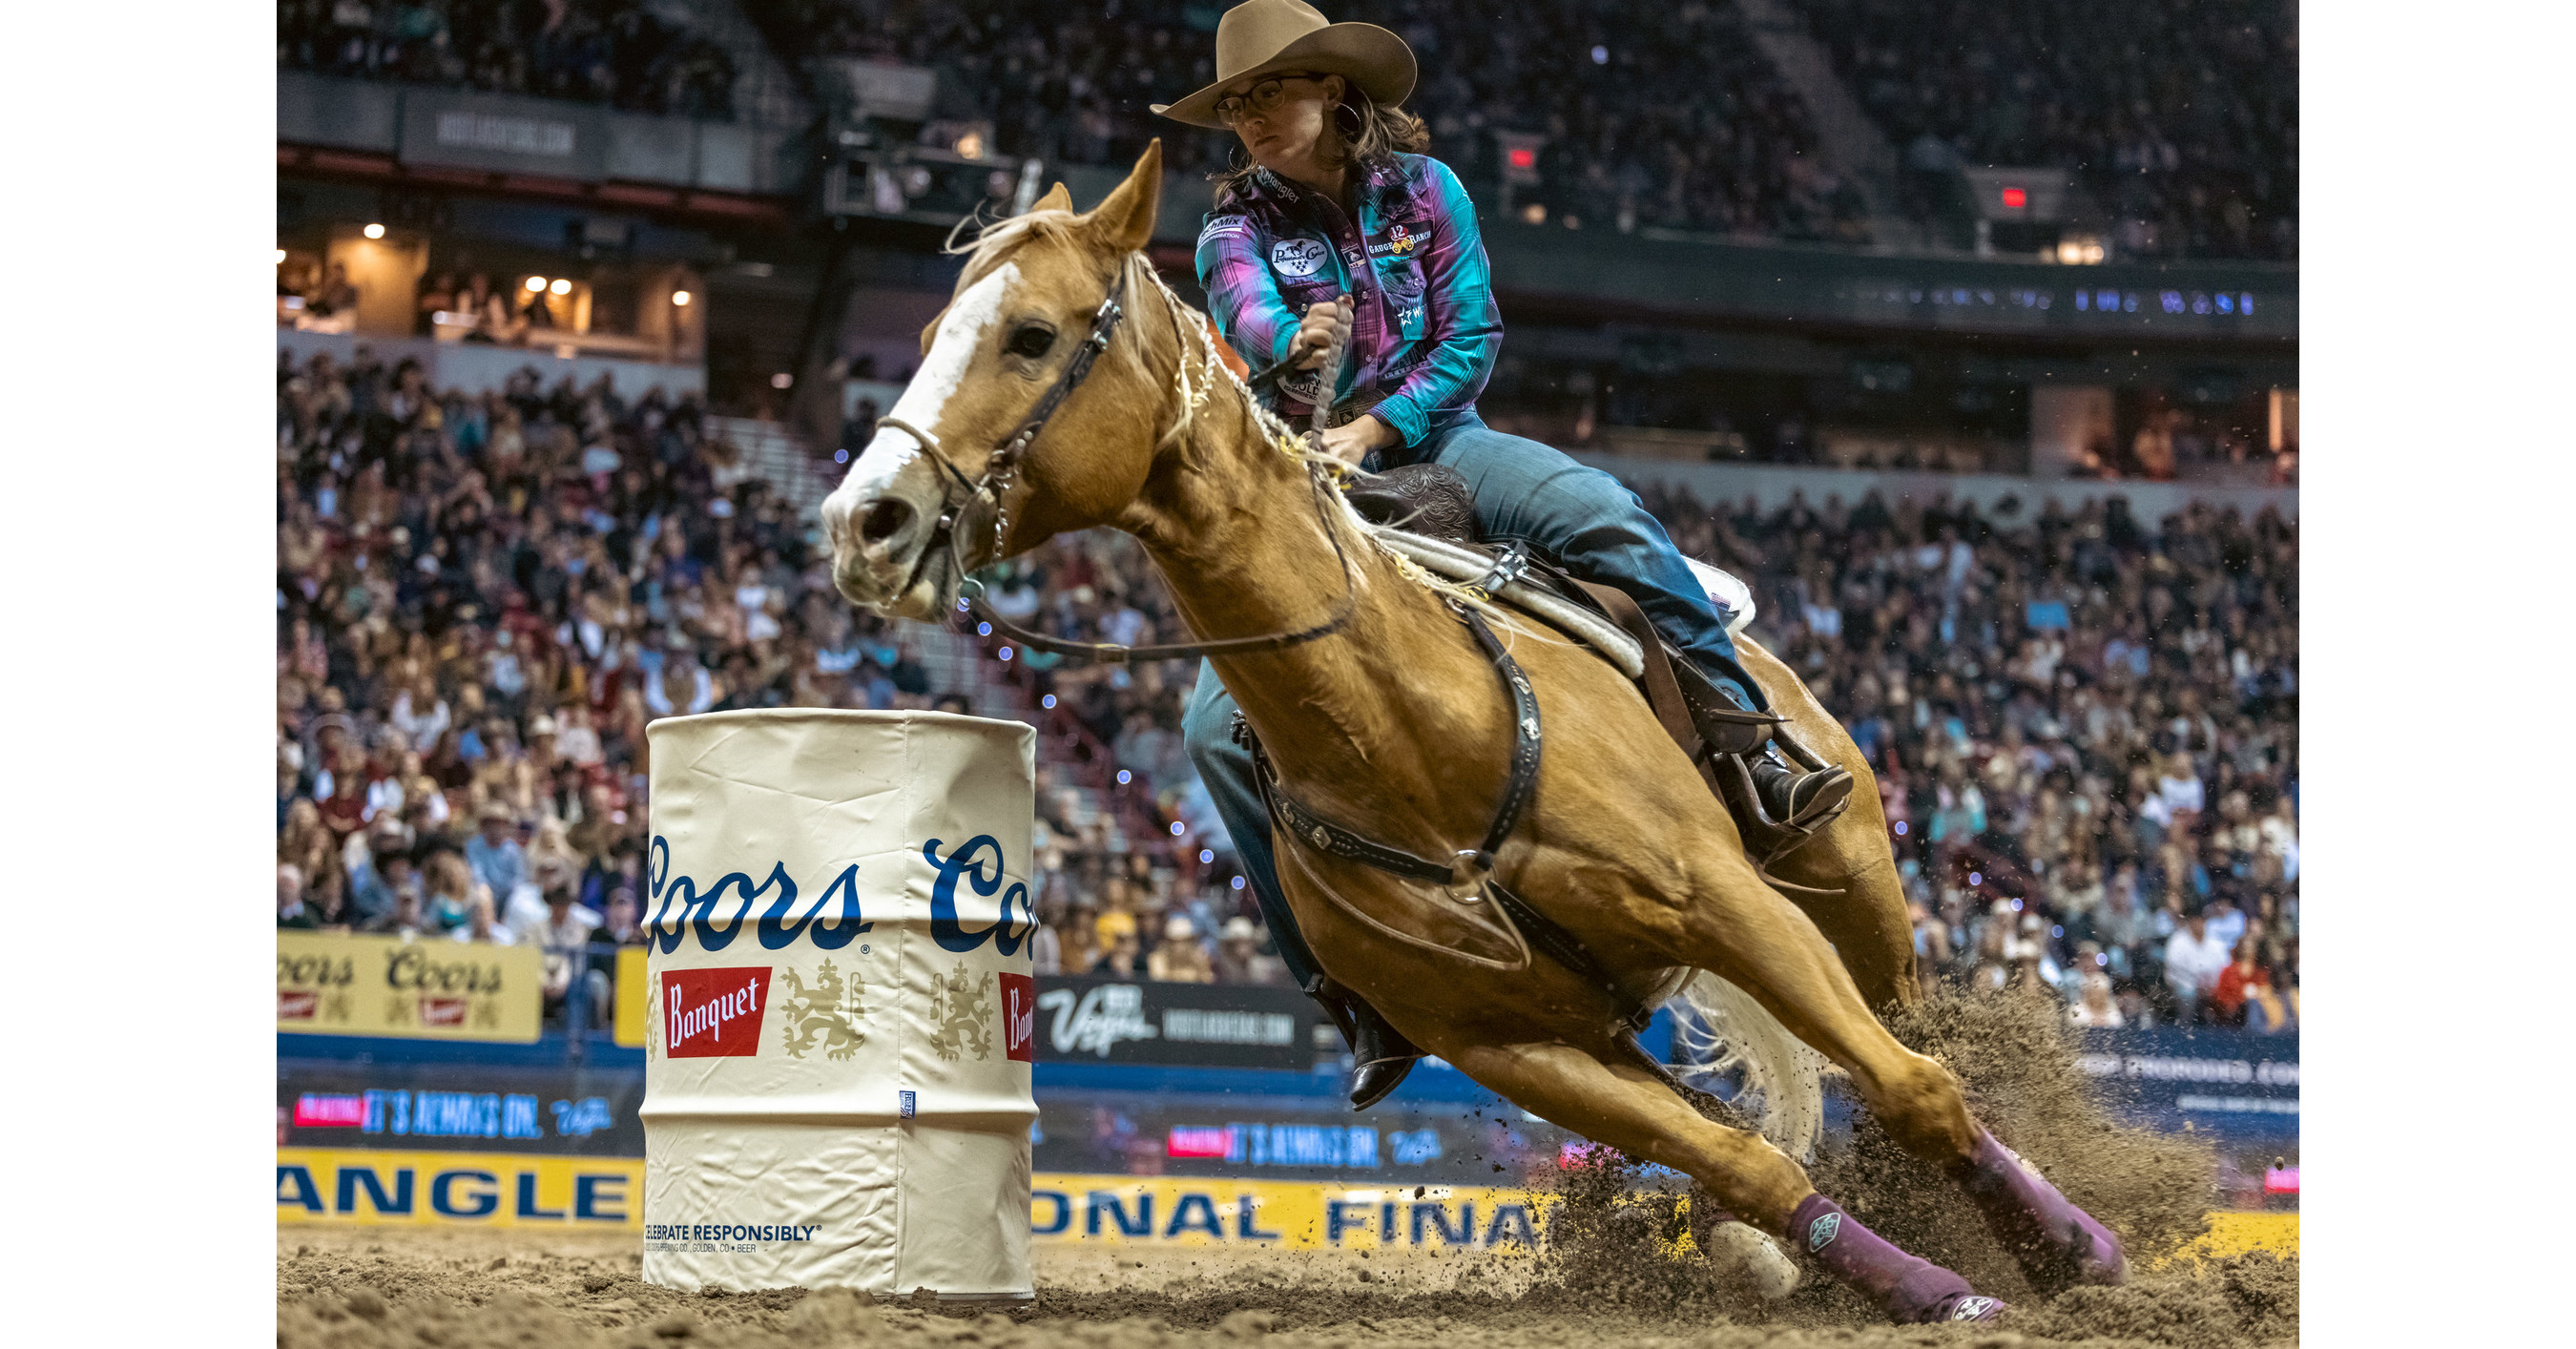 2022 Wrangler National Finals Rodeo Broadcast Schedule on The Cowboy  Channel Announced for December 1-10 live from Las Vegas